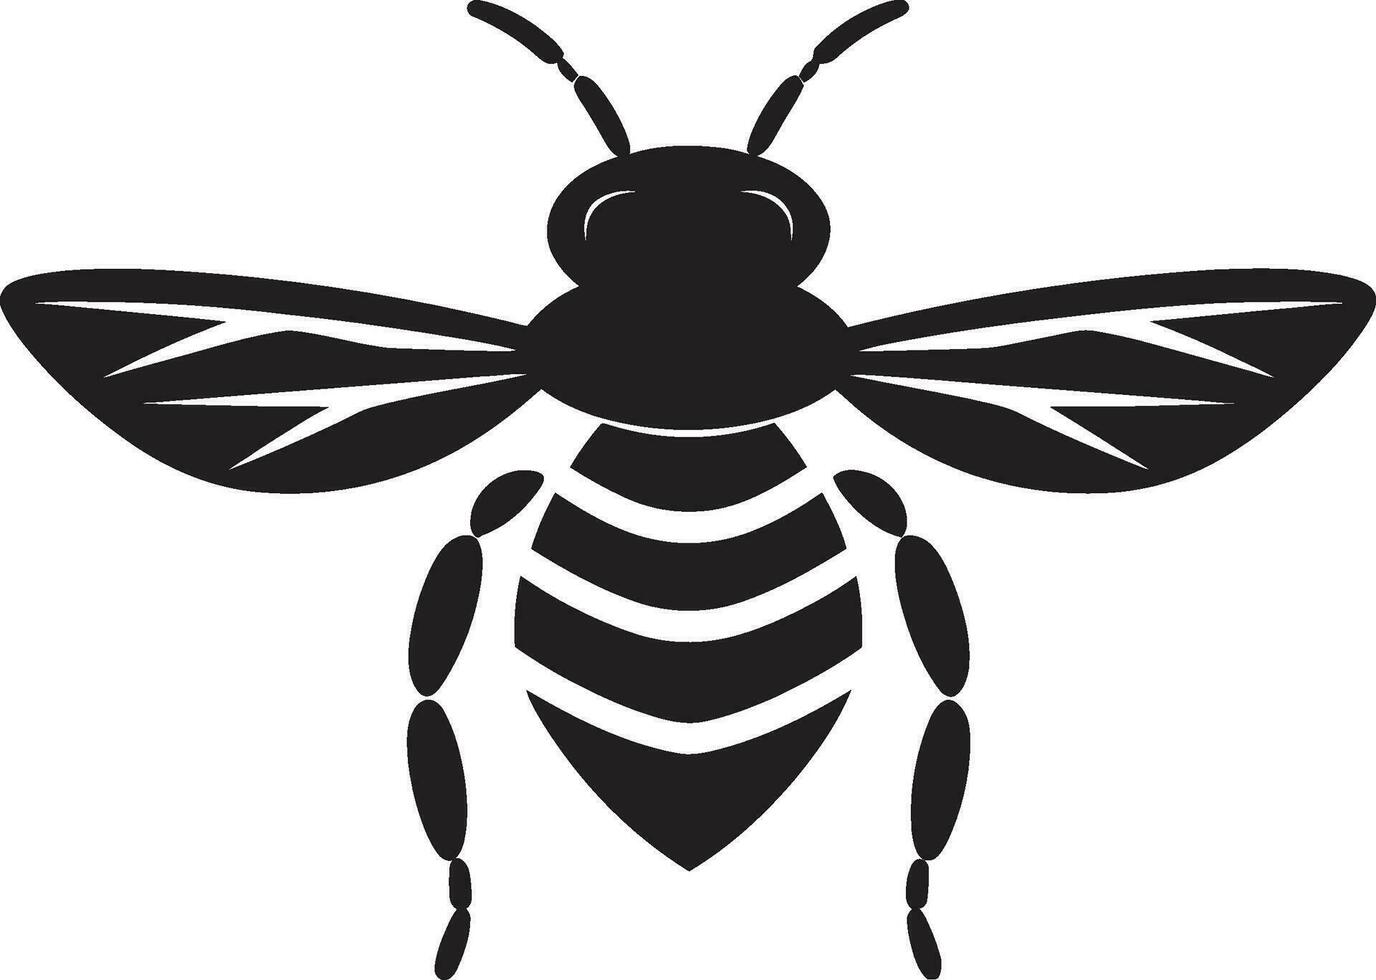 Elegance in Natures Tune Cicada Icons Ode to Wildlife Monochromatic Music Black Cicadas Song of Nature vector